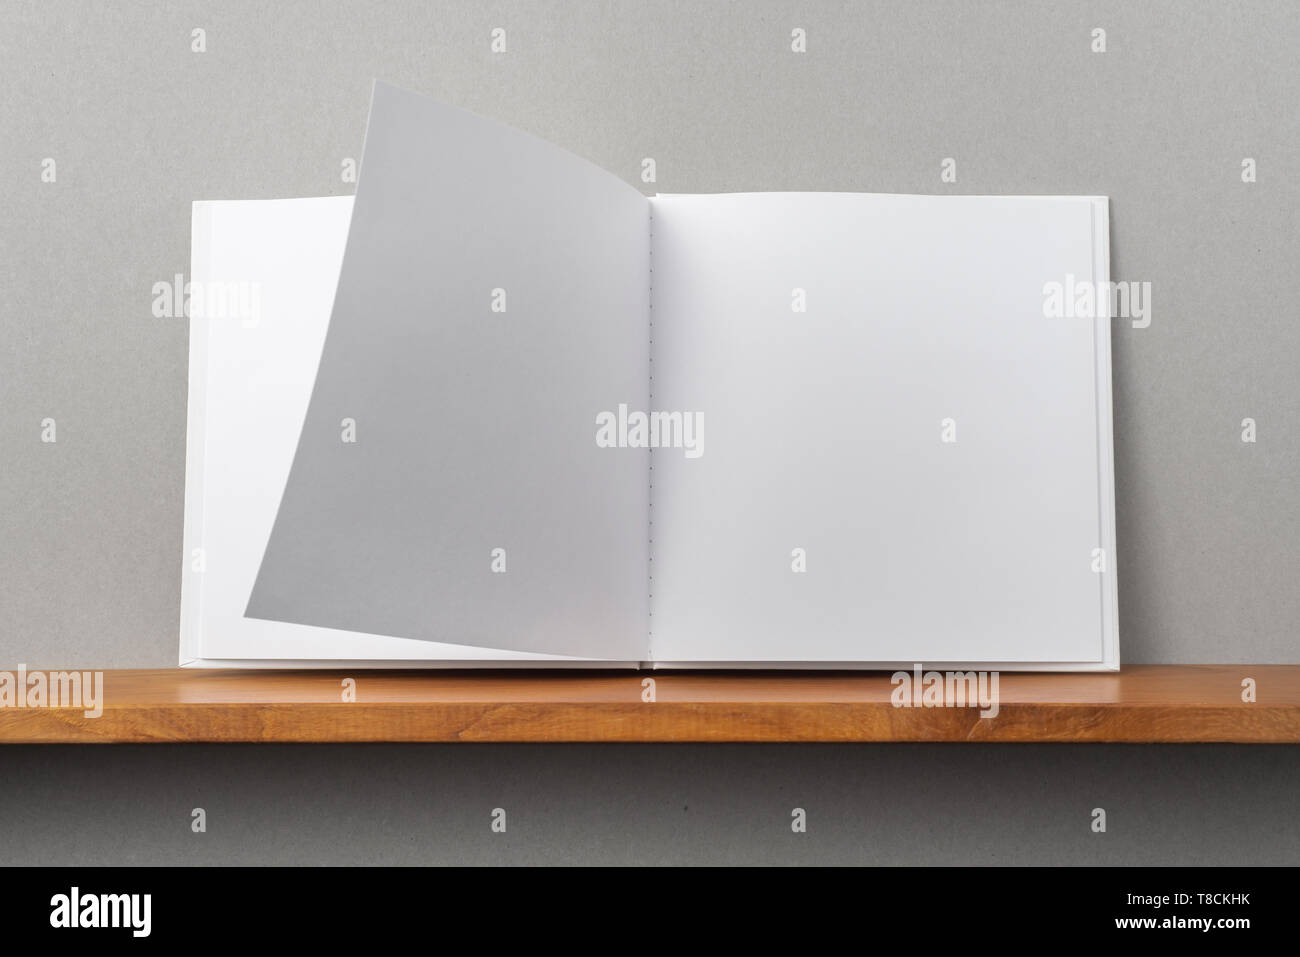 Design Concept Front View Of Opened Square White Notebook On